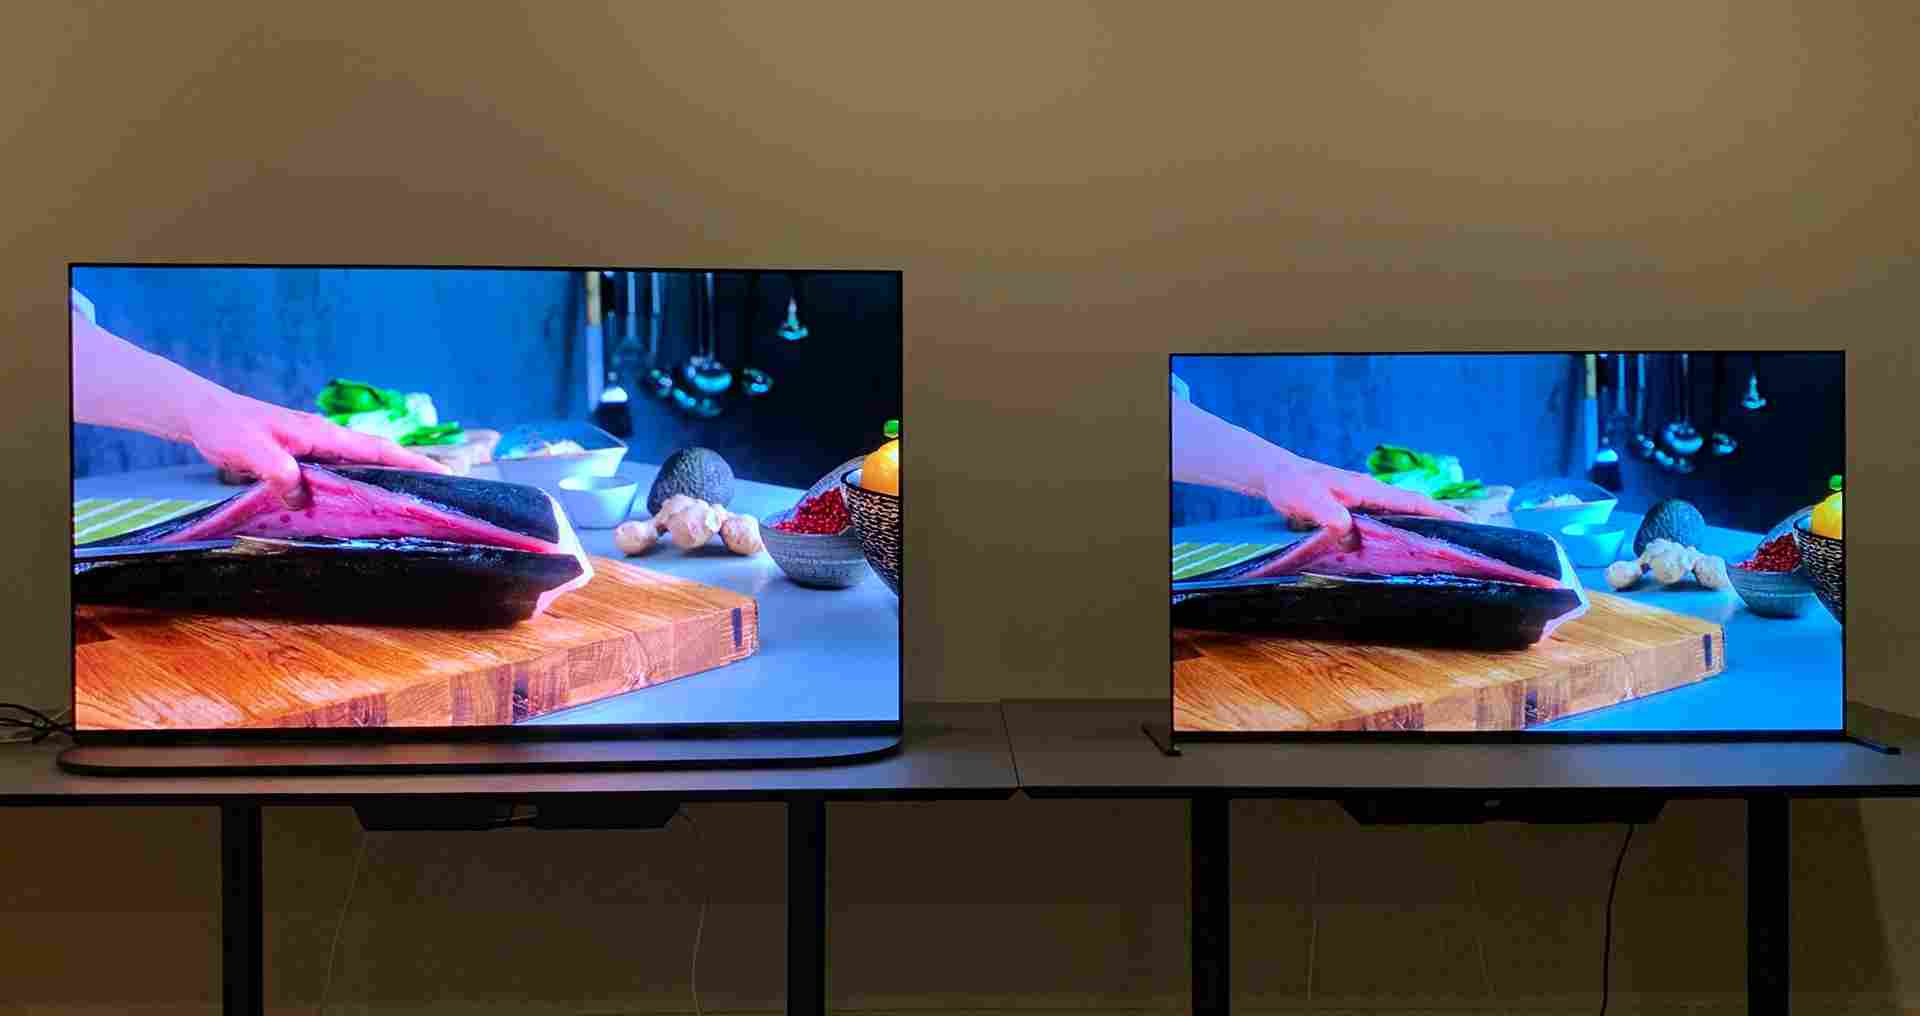 55-inch-tv-vs-65-inch-tv-which-one-should-you-buy